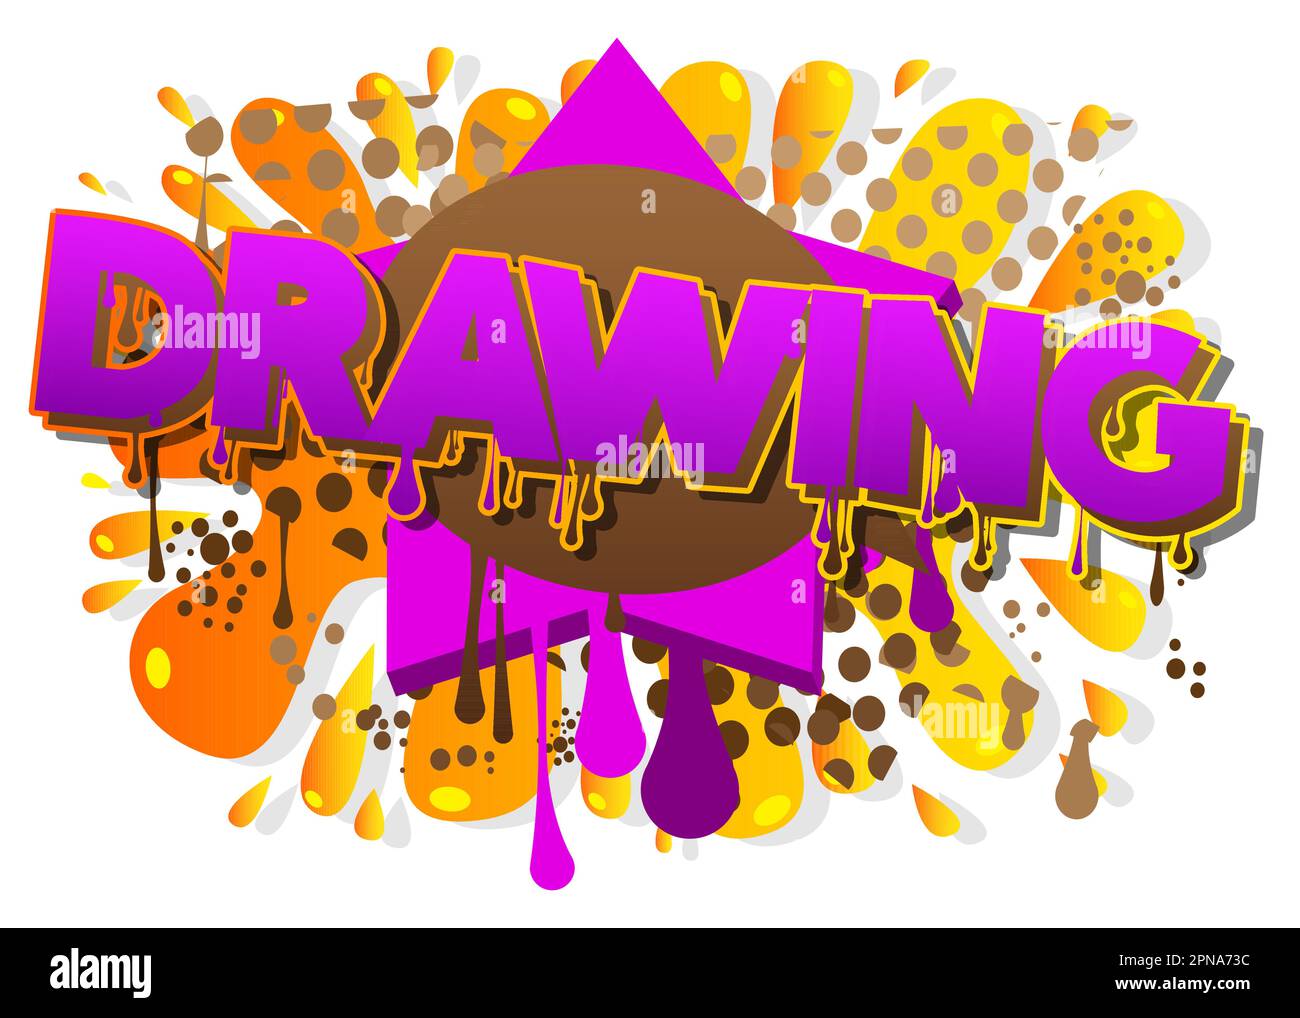 Drawing. Graffiti tag. Abstract modern street art decoration performed in urban painting style. Stock Vector